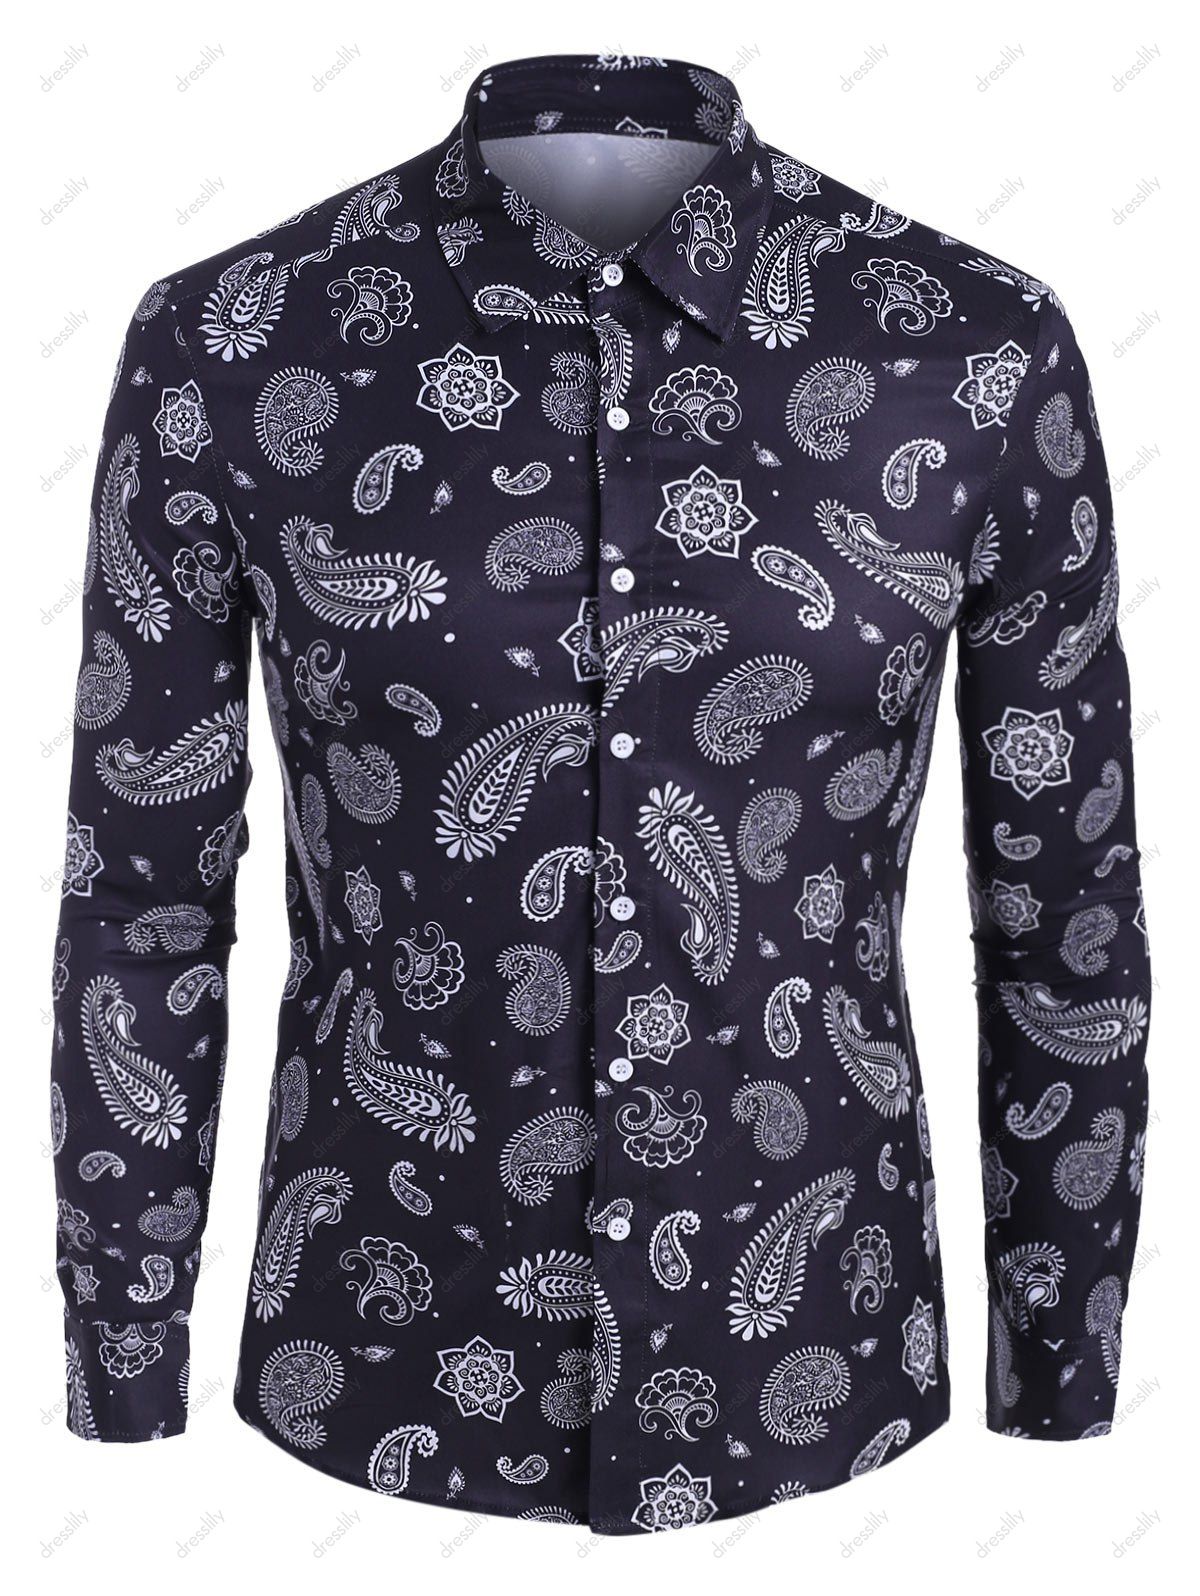 [70% OFF] 2021 Paisley Print Long Sleeve Button Up Shirt In BLACK ...